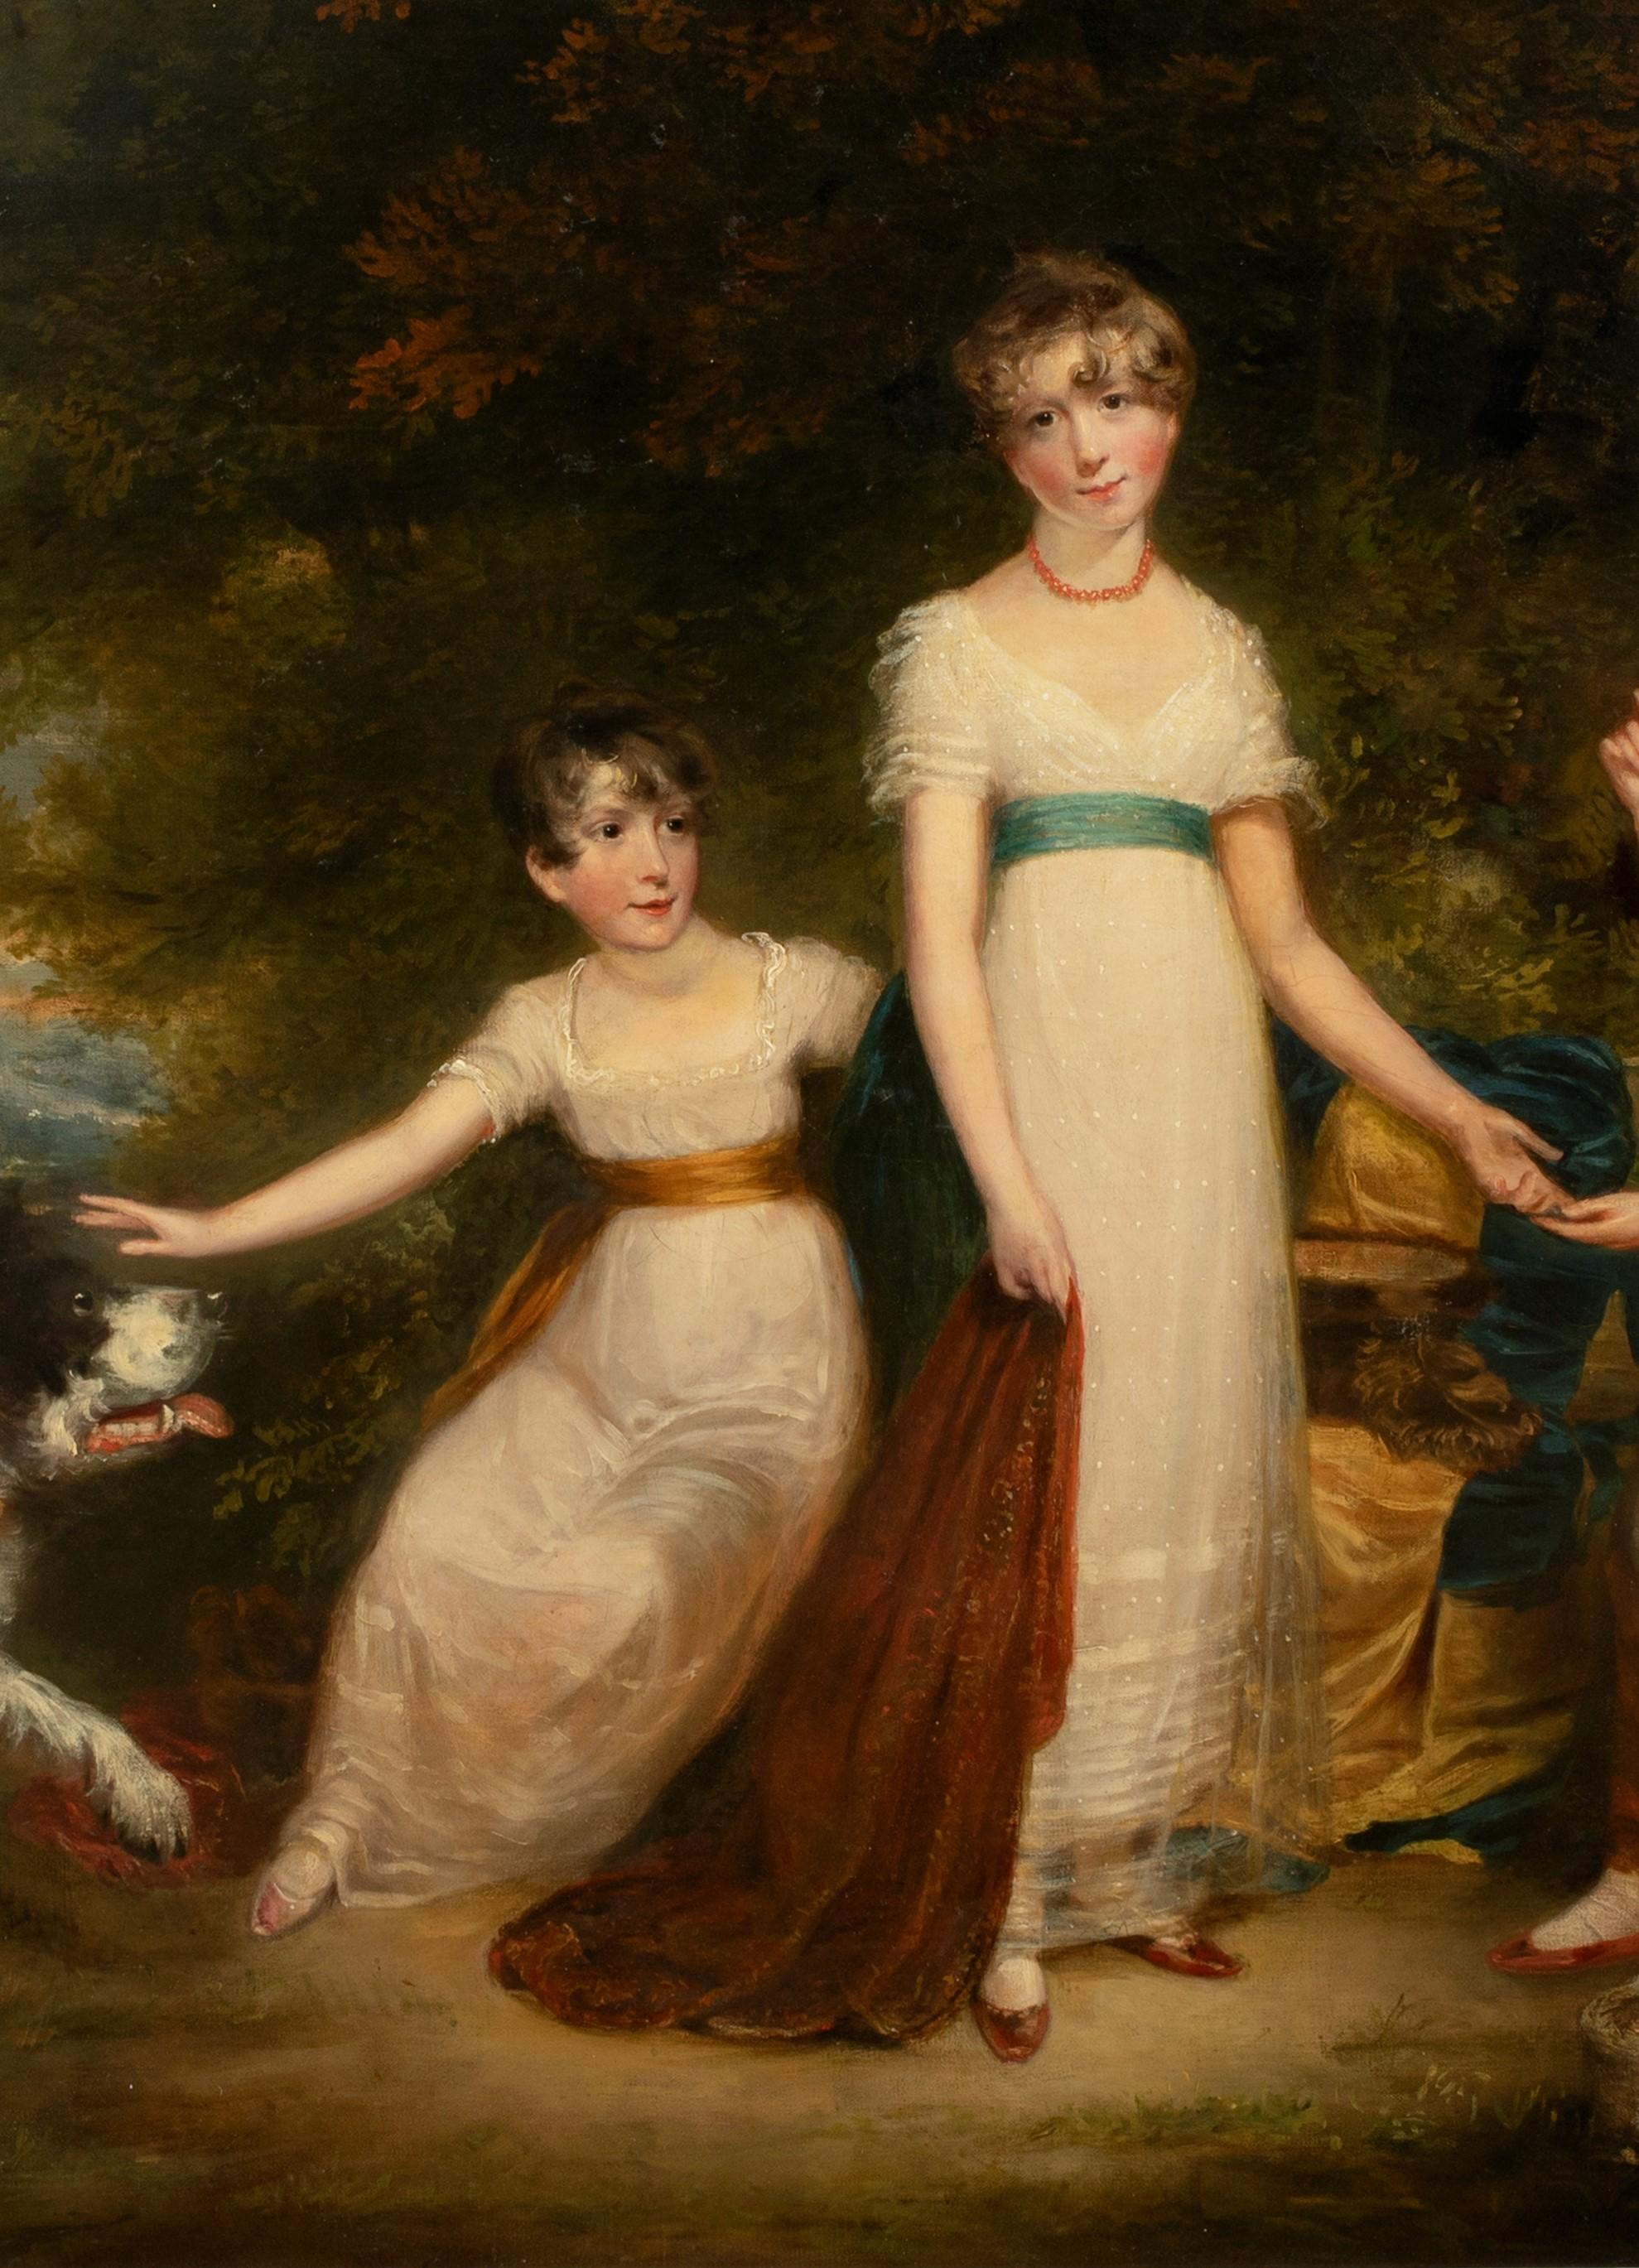 The Children Of The Stirling Family, 18th Century  - Brown Portrait Painting by Sir William Beechey